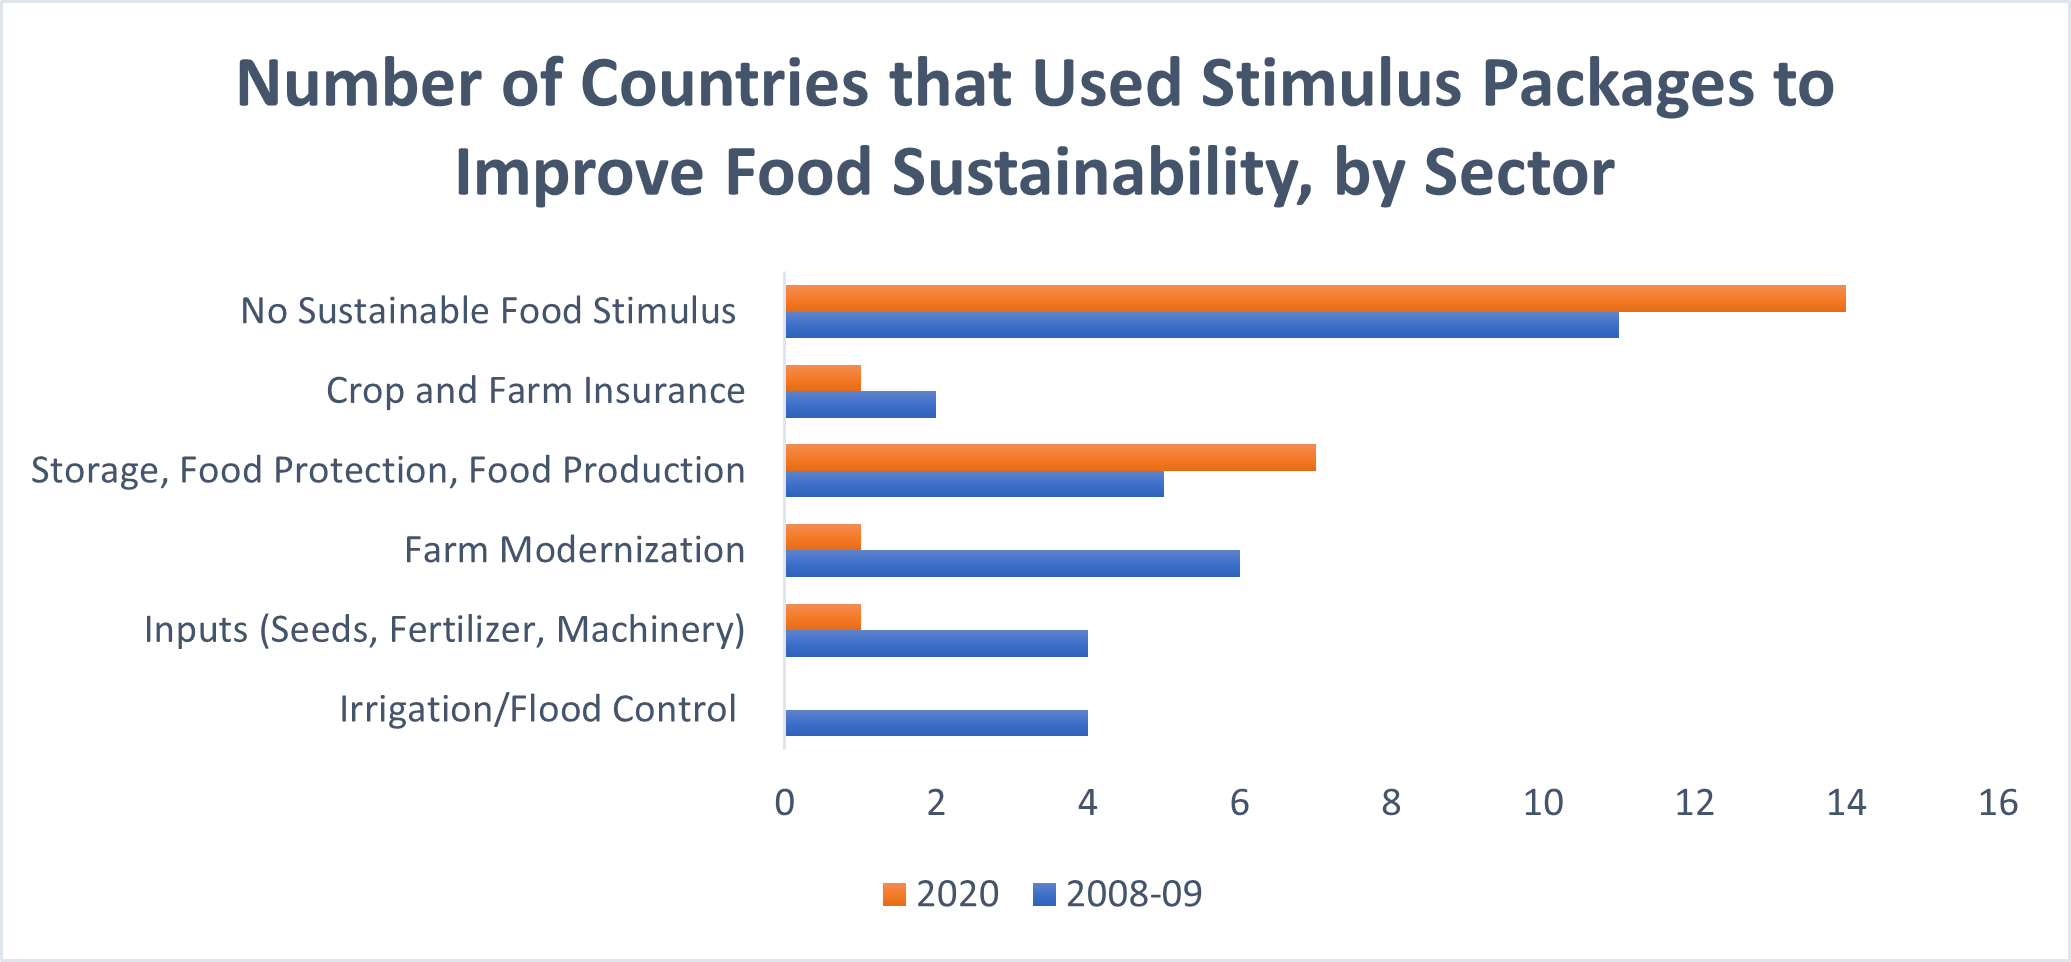 Number of Countries that Used Stimulus Packages to Improve Food Sustainability, by Sector